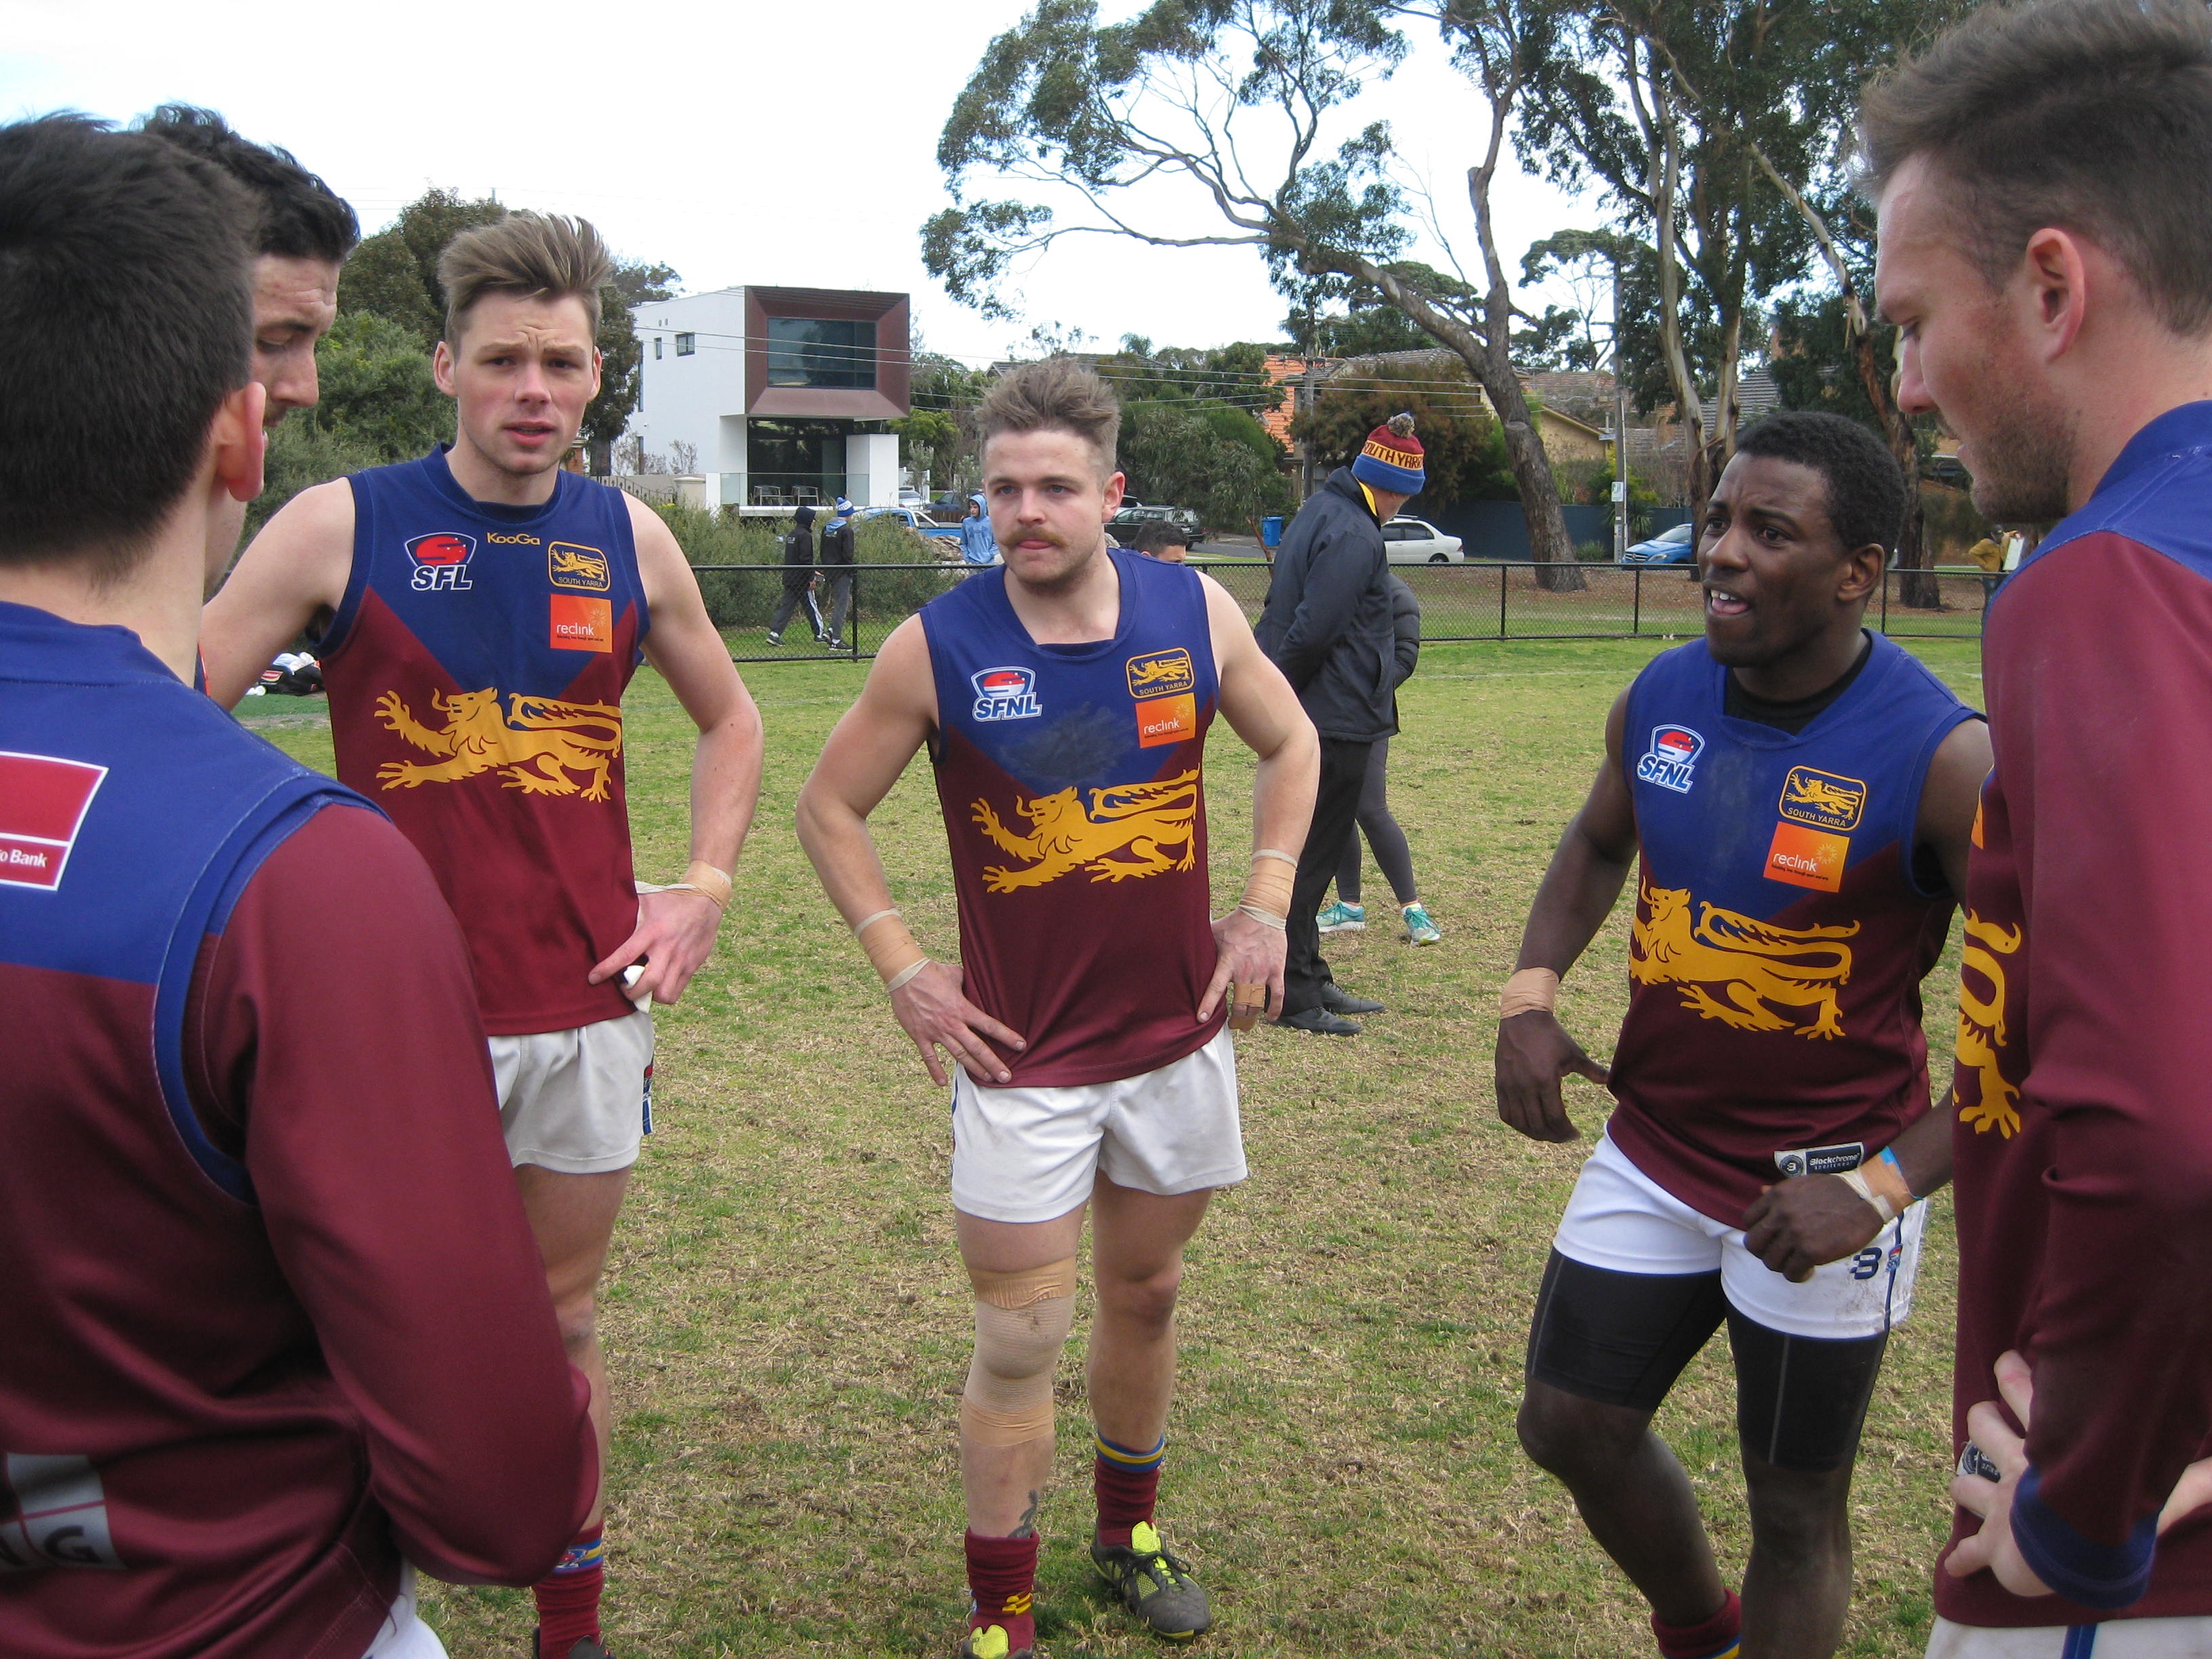 Mwaba (second from right) in the South Yarra huddle.